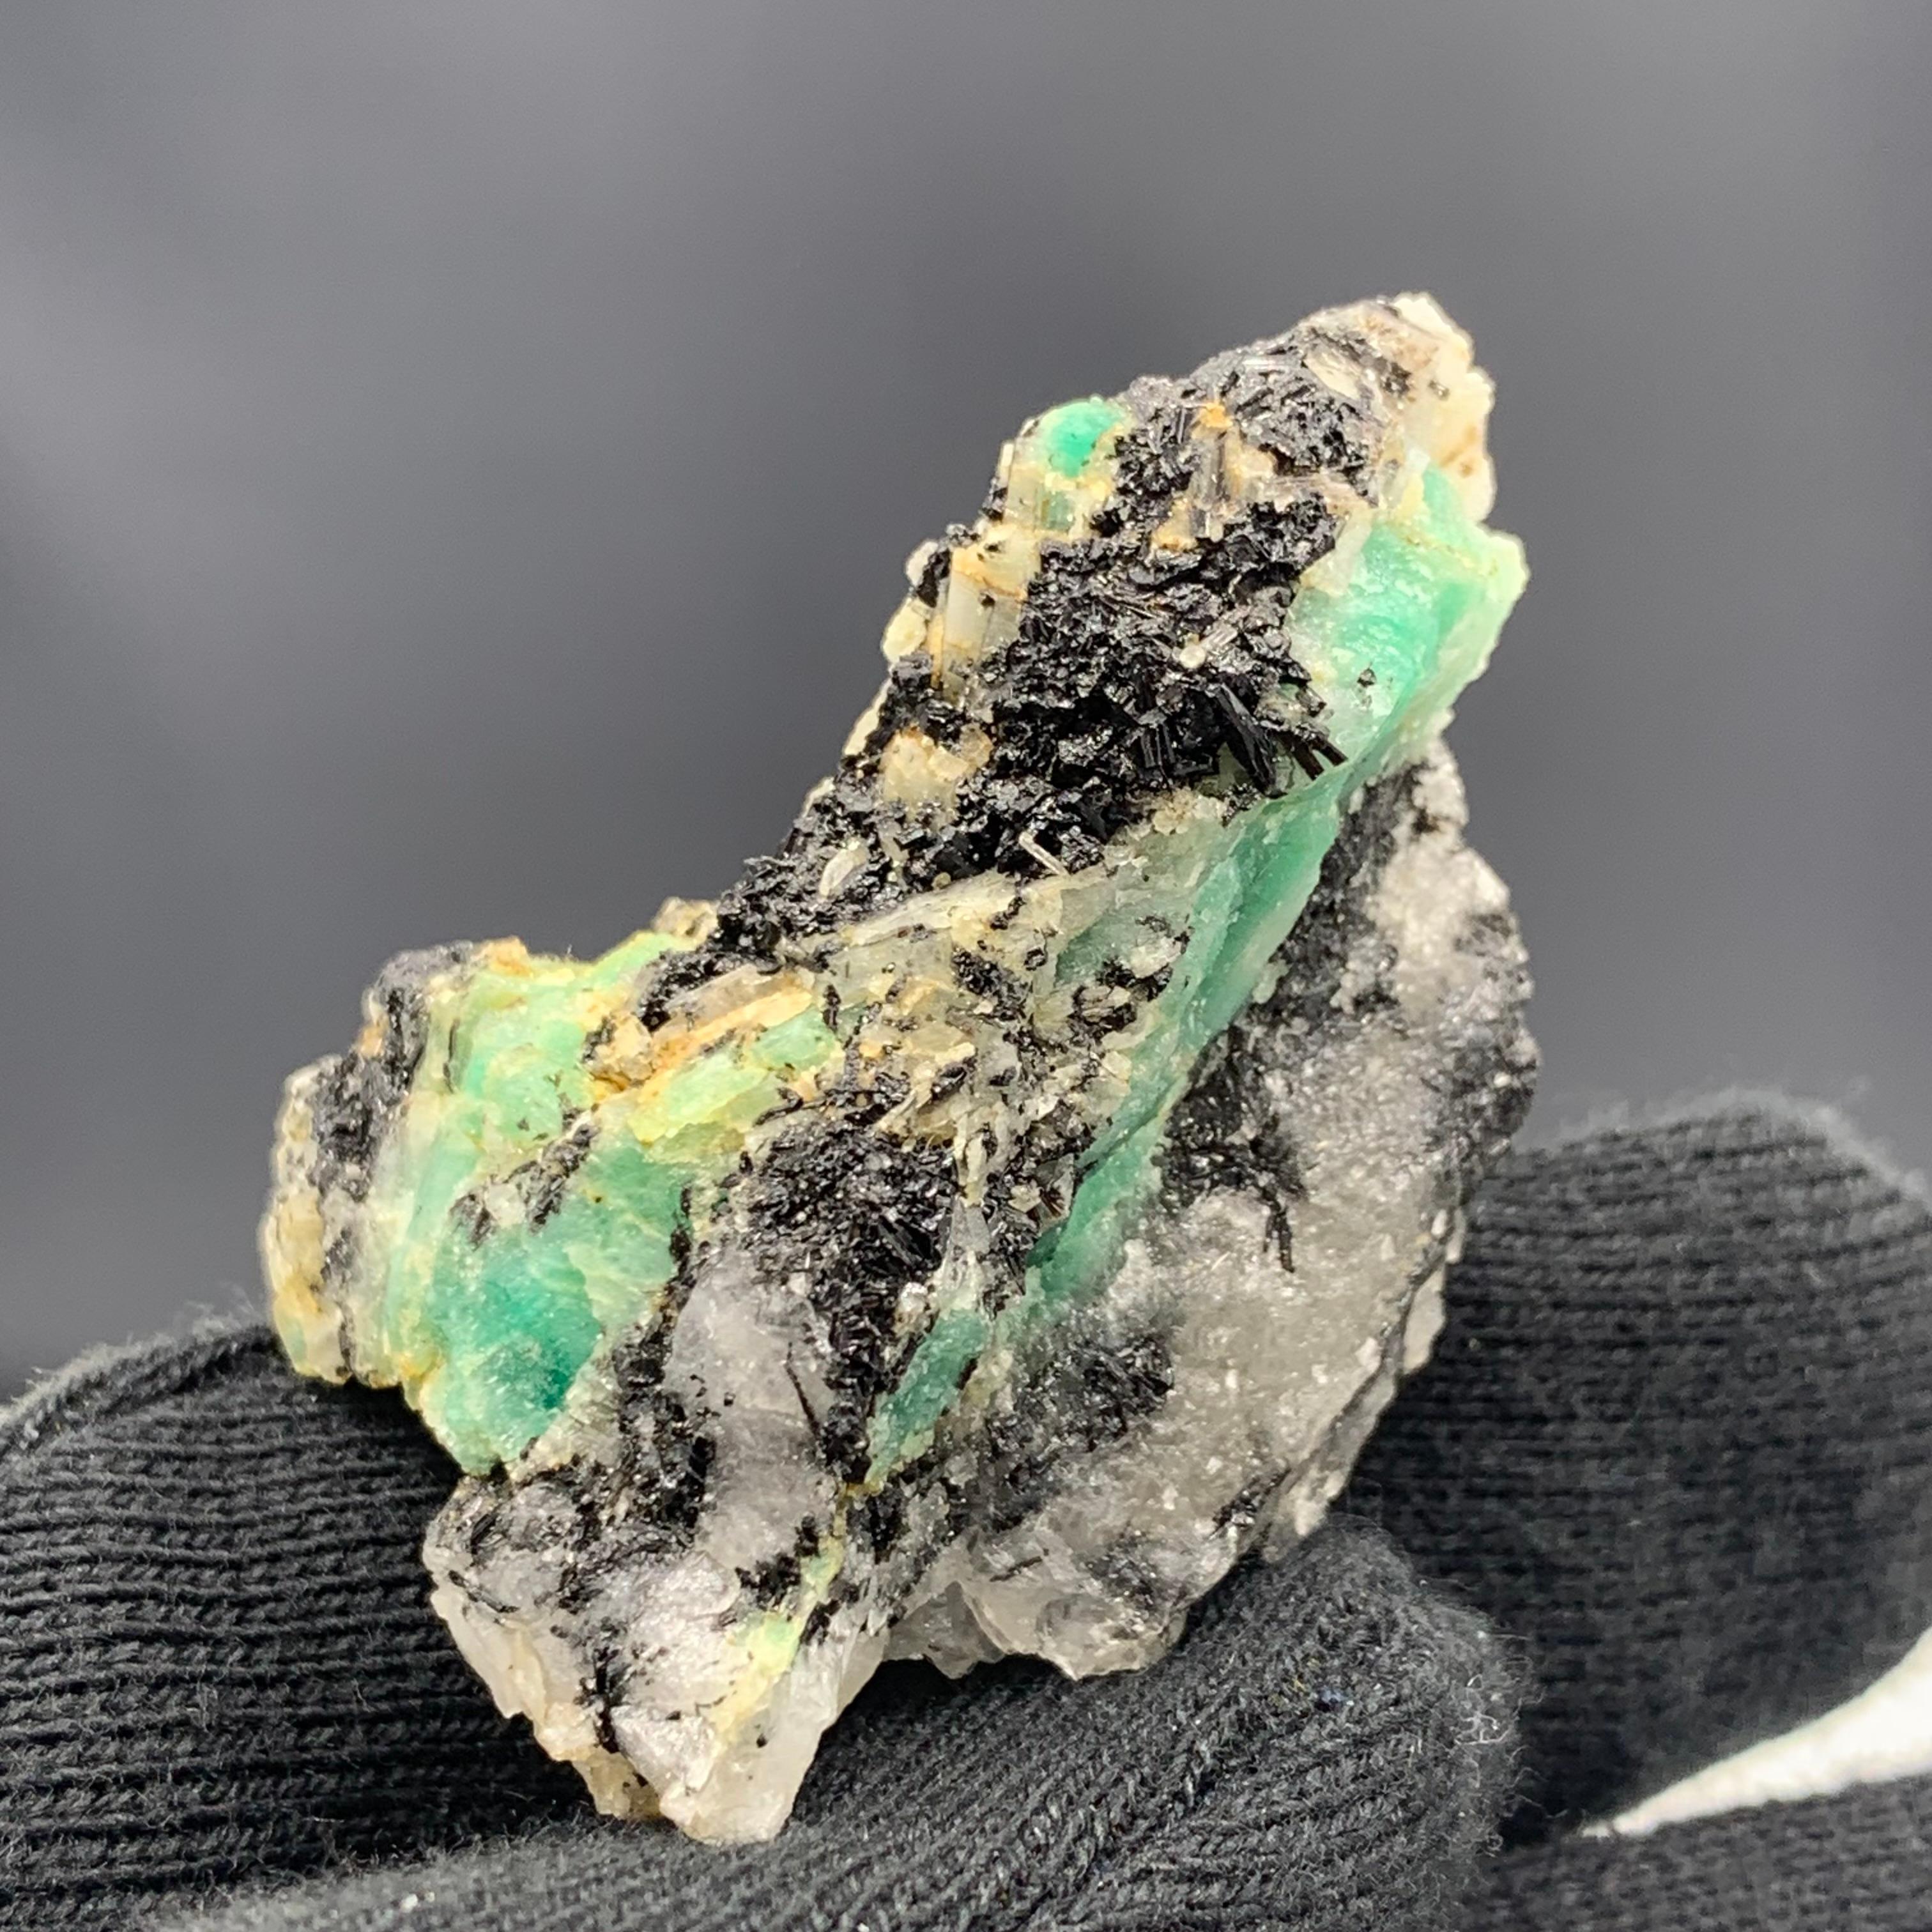 Pakistani 20.98 Gram Lovely Emerald Specimen From Chitral Valley, Pakistan  For Sale